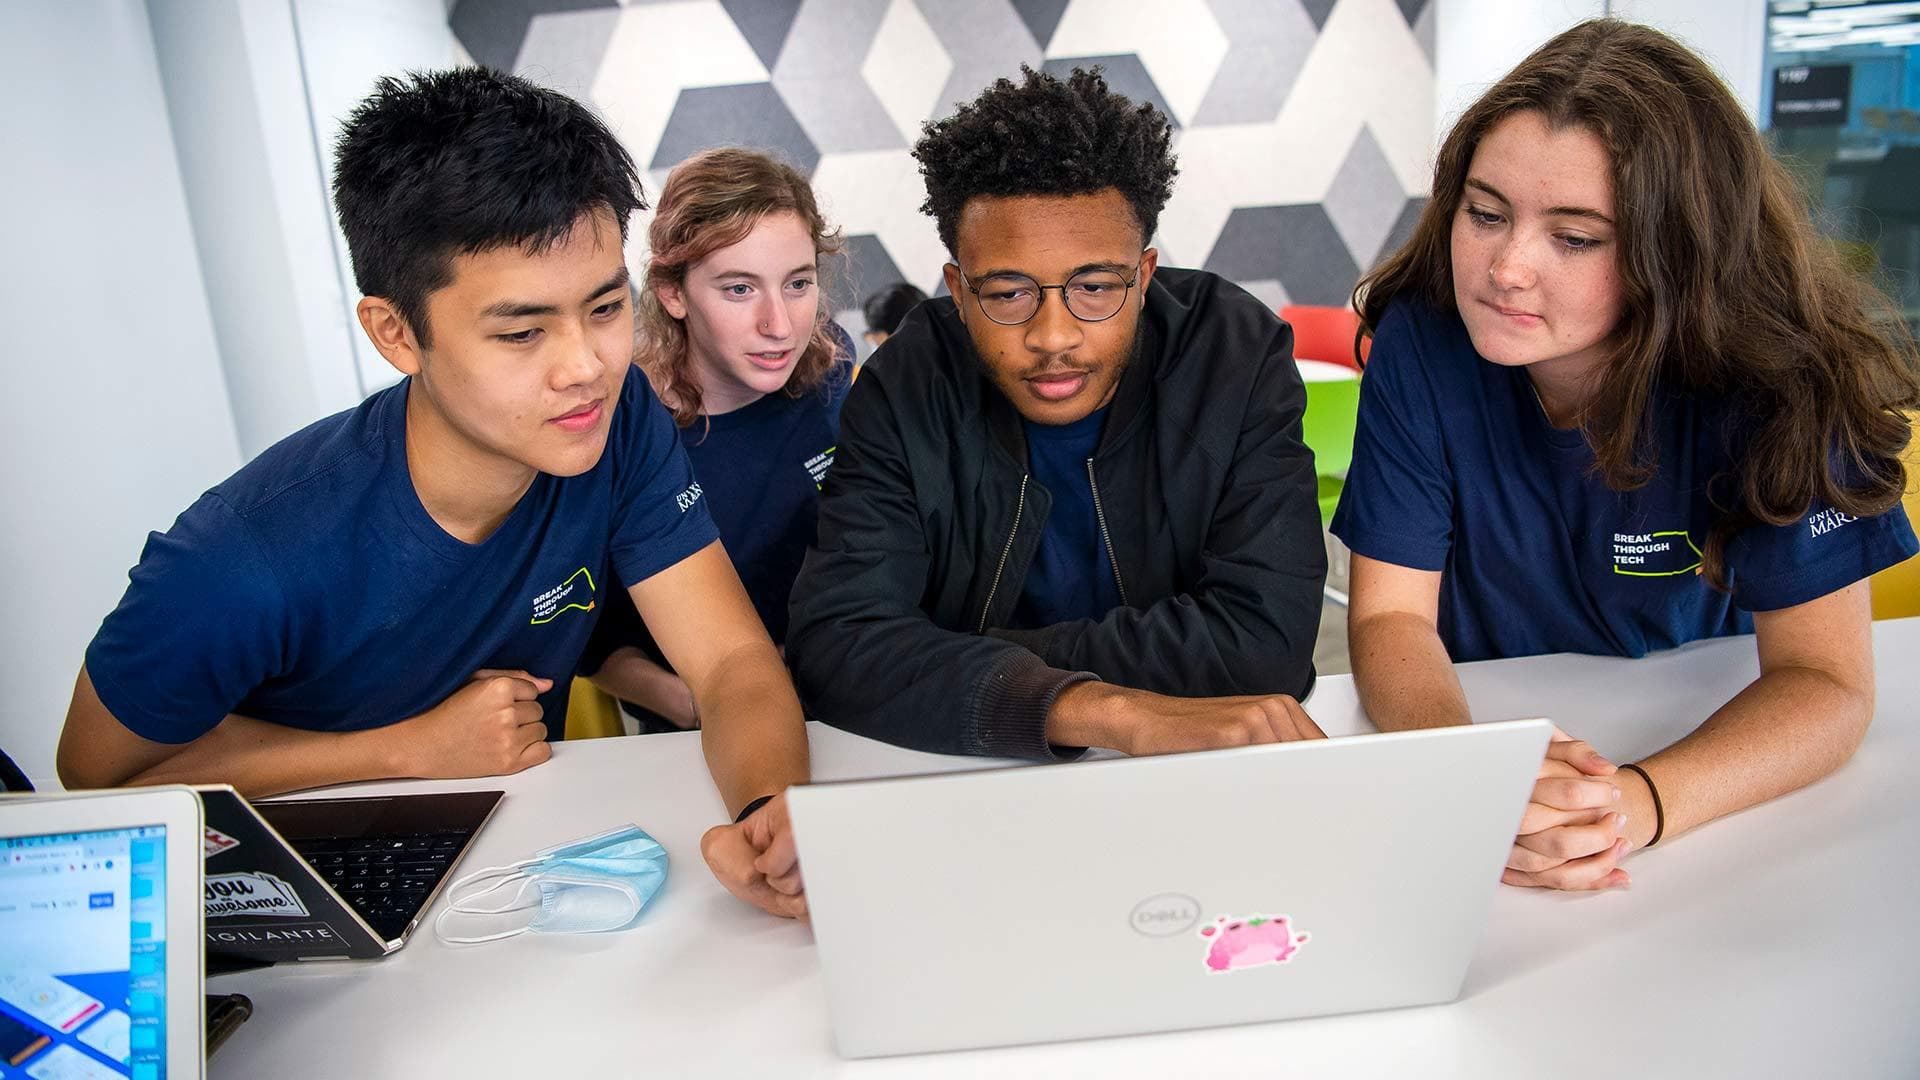 Four students huddle around a laptop